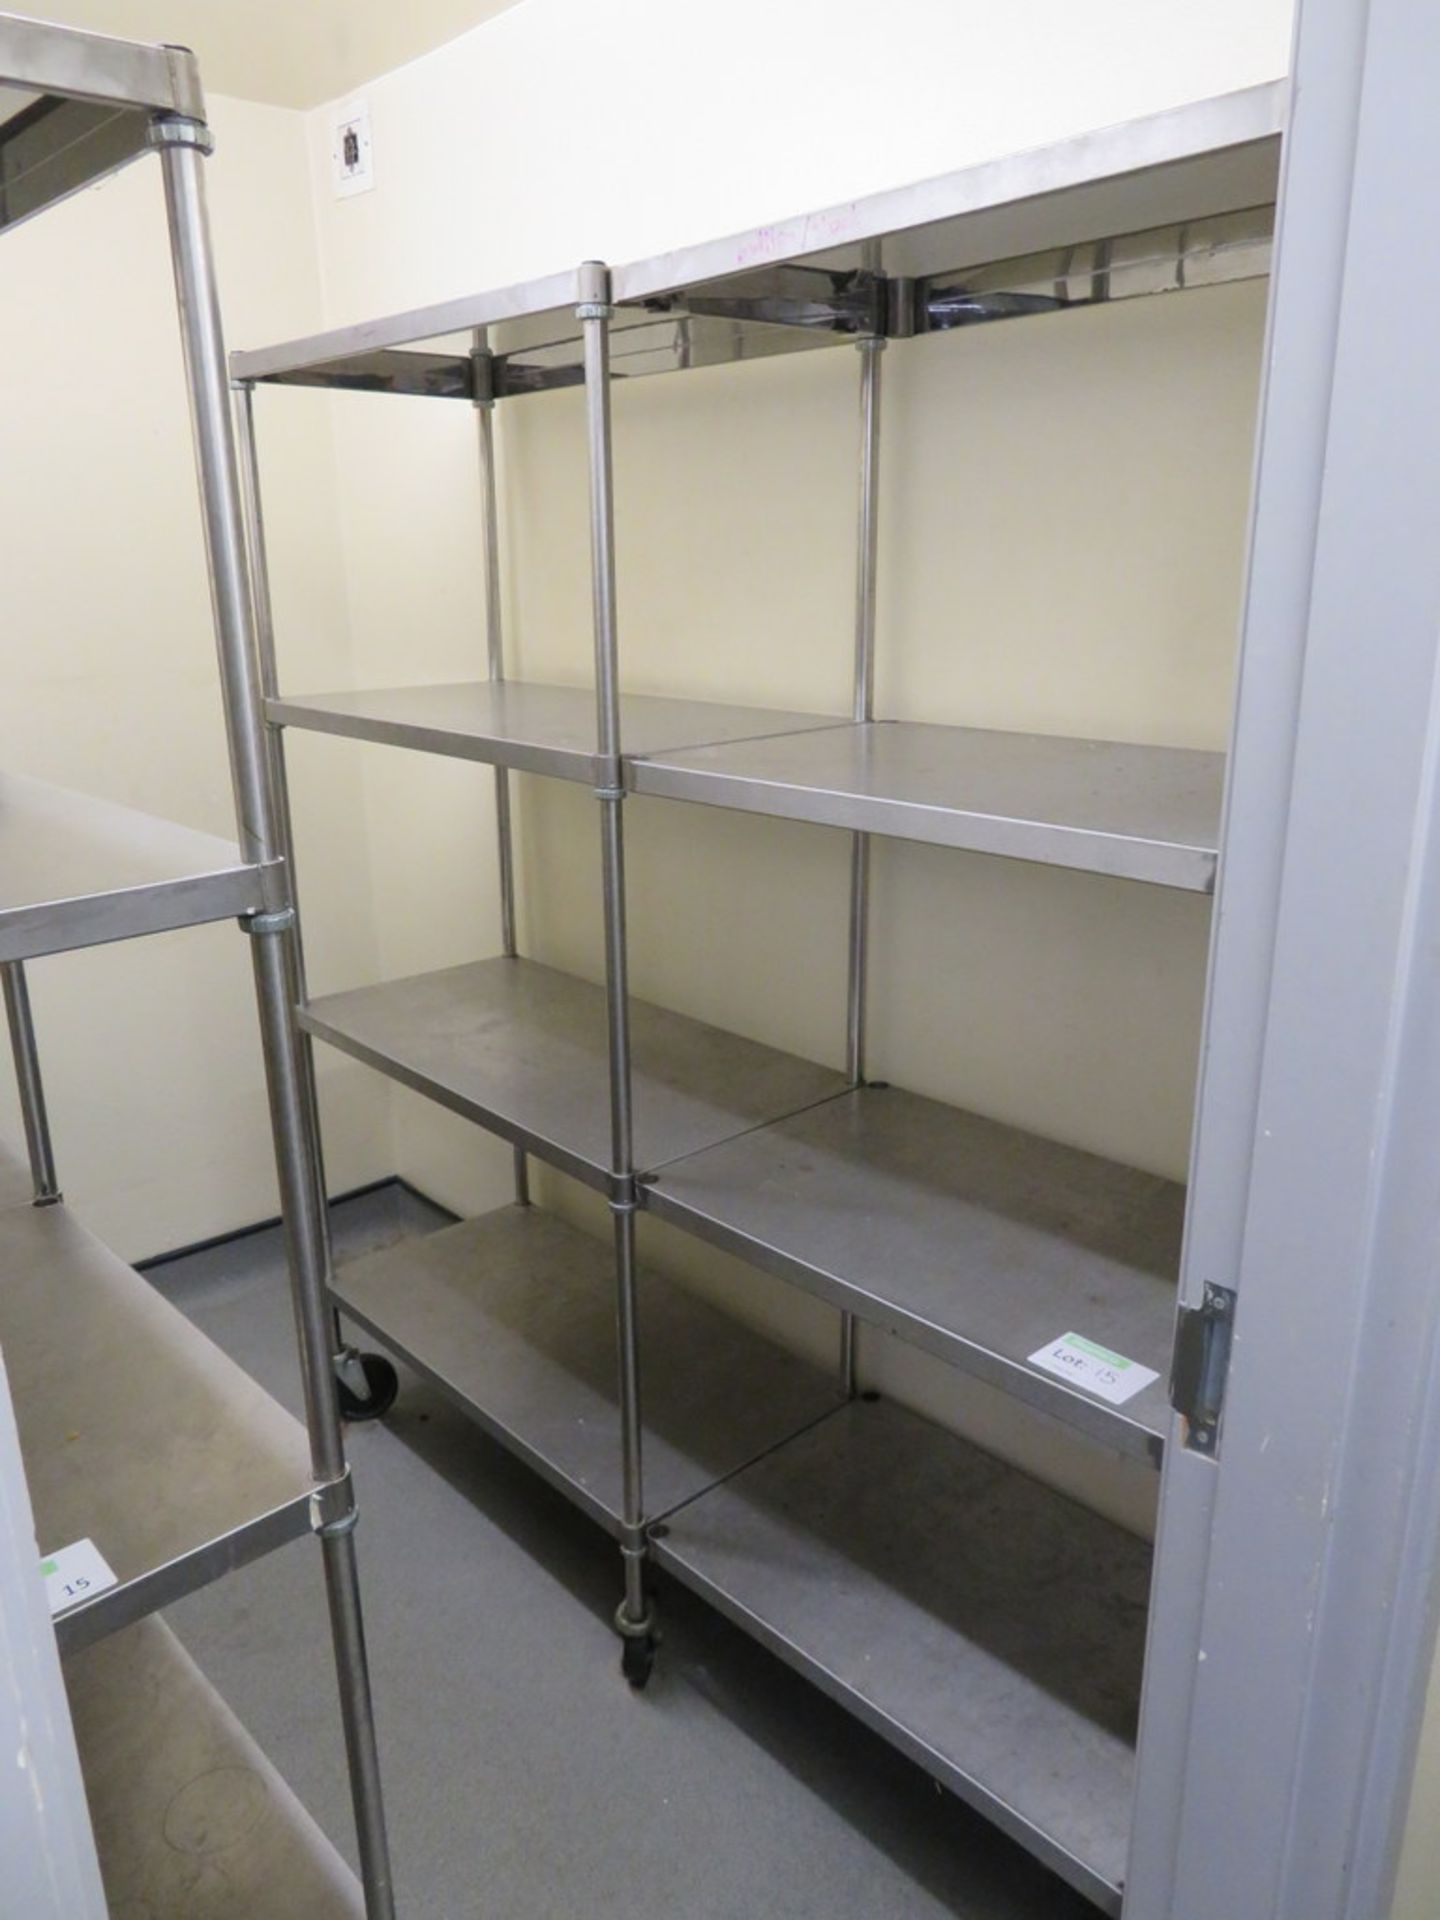 2 X STAINLESS STEEL MOBILE FOUR-TIER SHELF UNITS - Image 2 of 3